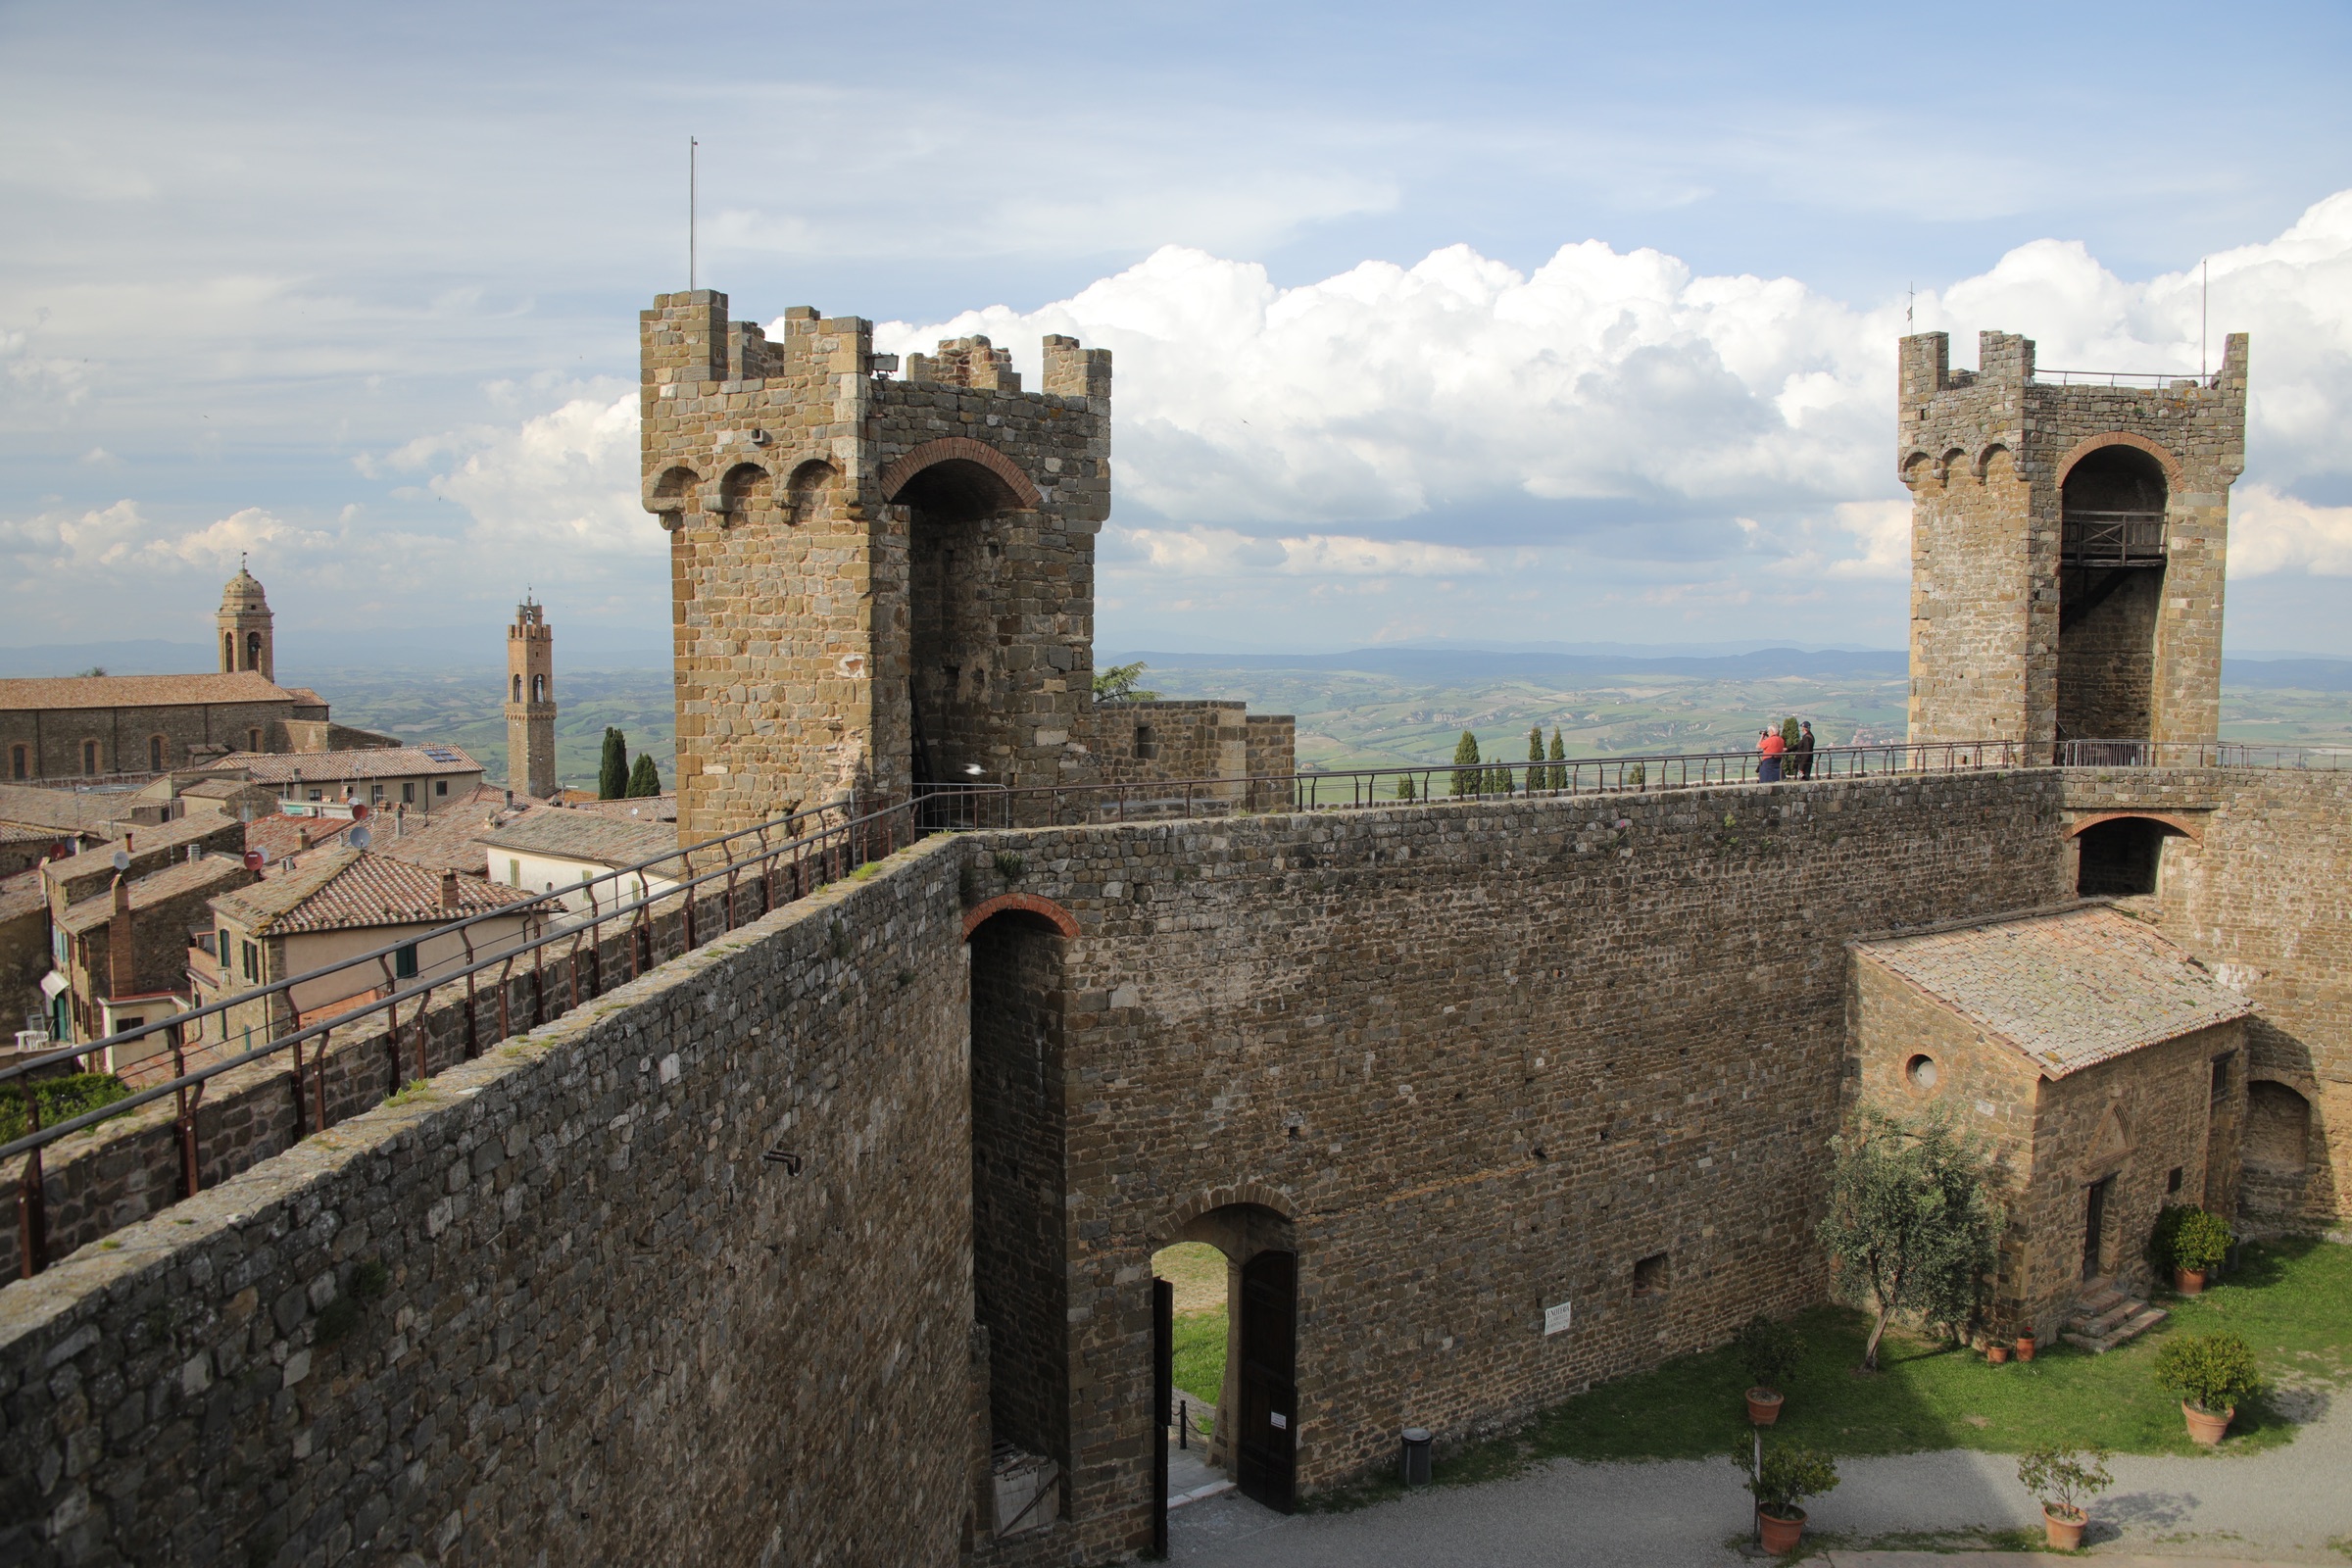 Tuscany Italy photo tour with Don Mammoser - historic bridge and buidling